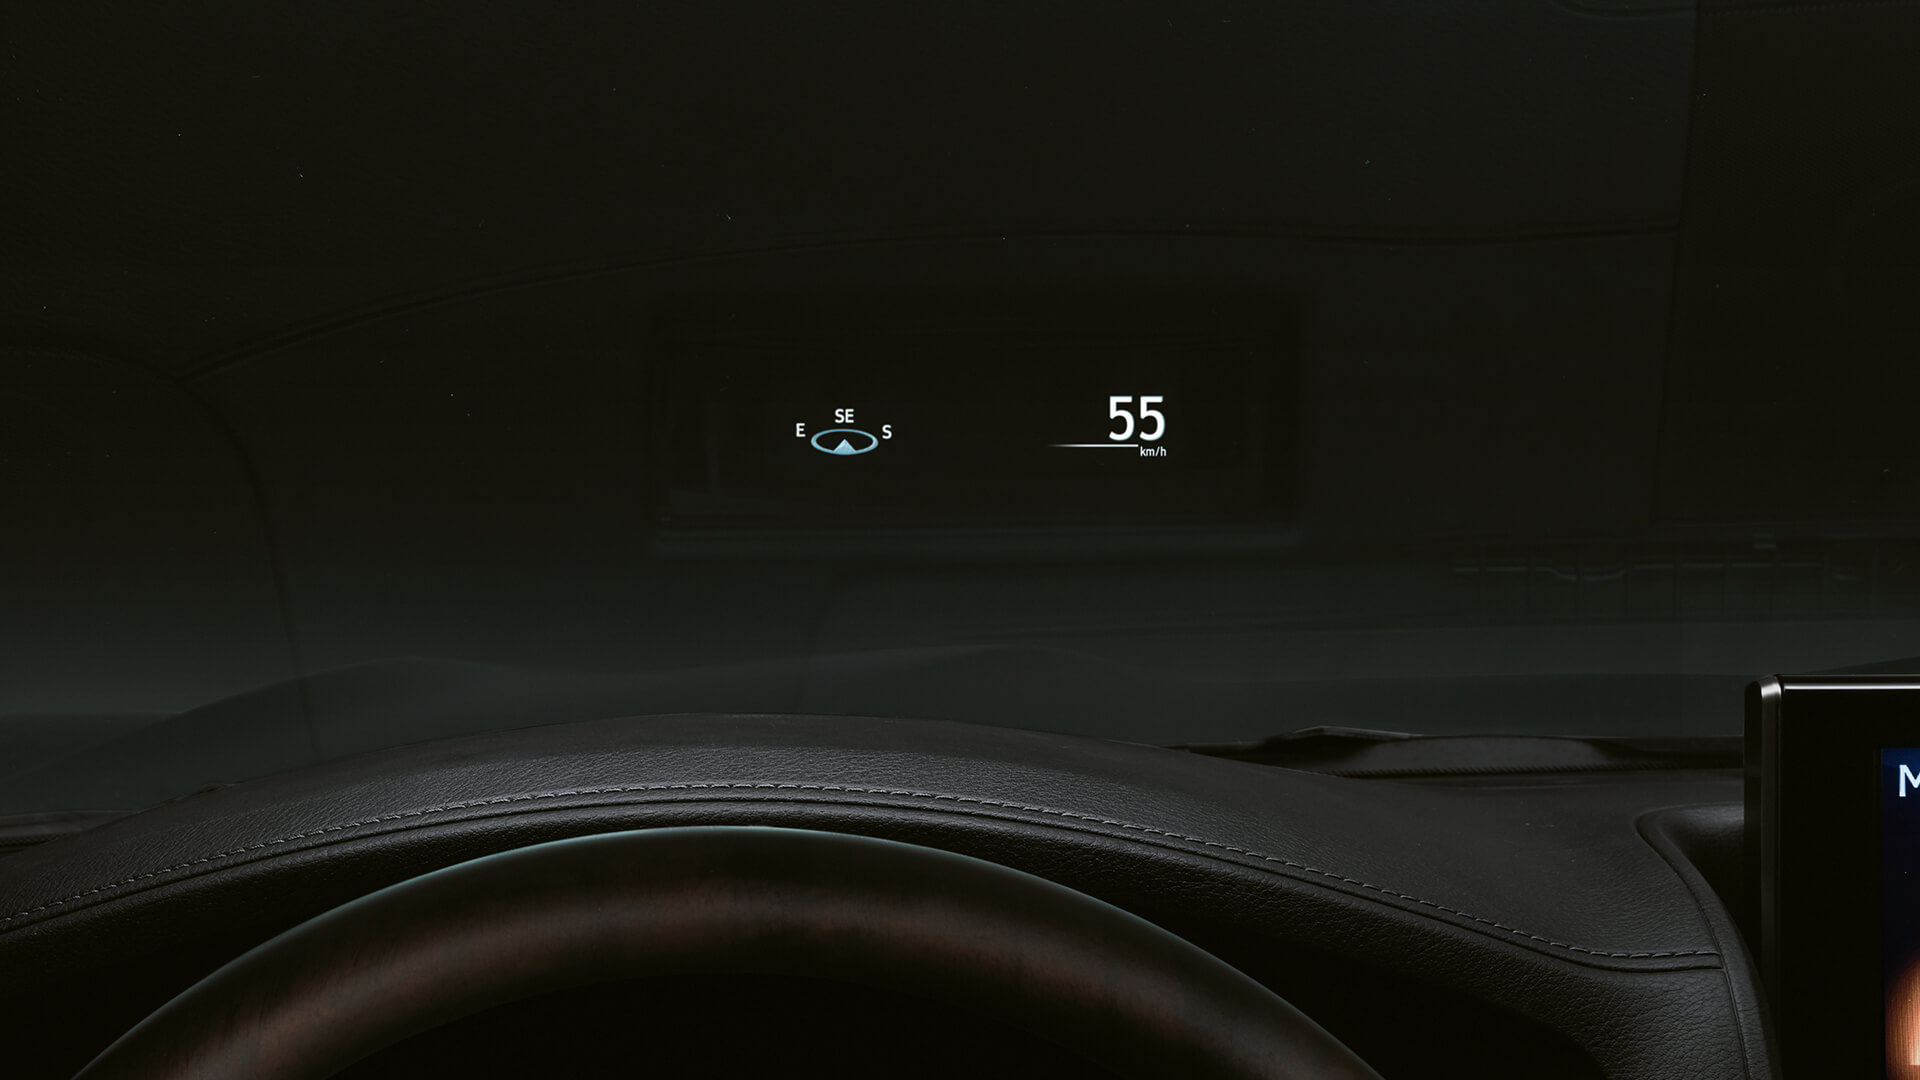 2017-lexus-lx-570-features-heads-up-display-1920x1080